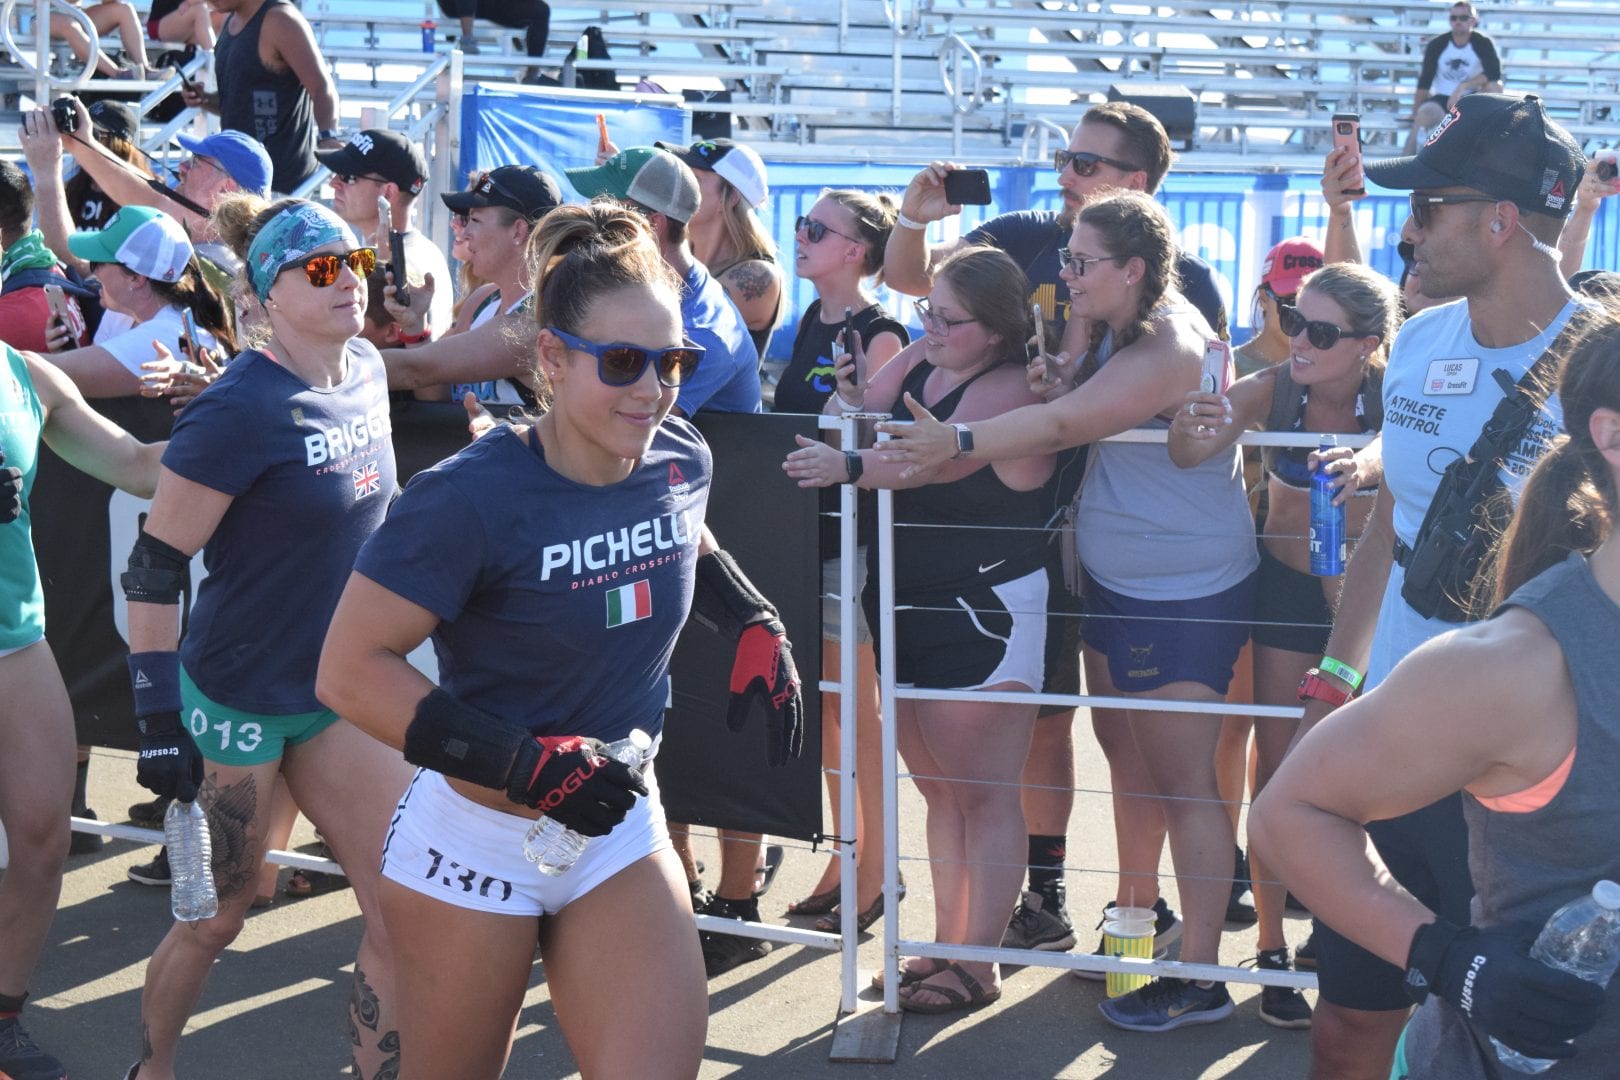 Alessandra Pichelli enters the stadium on the first day of the 2019 CrossFit Games